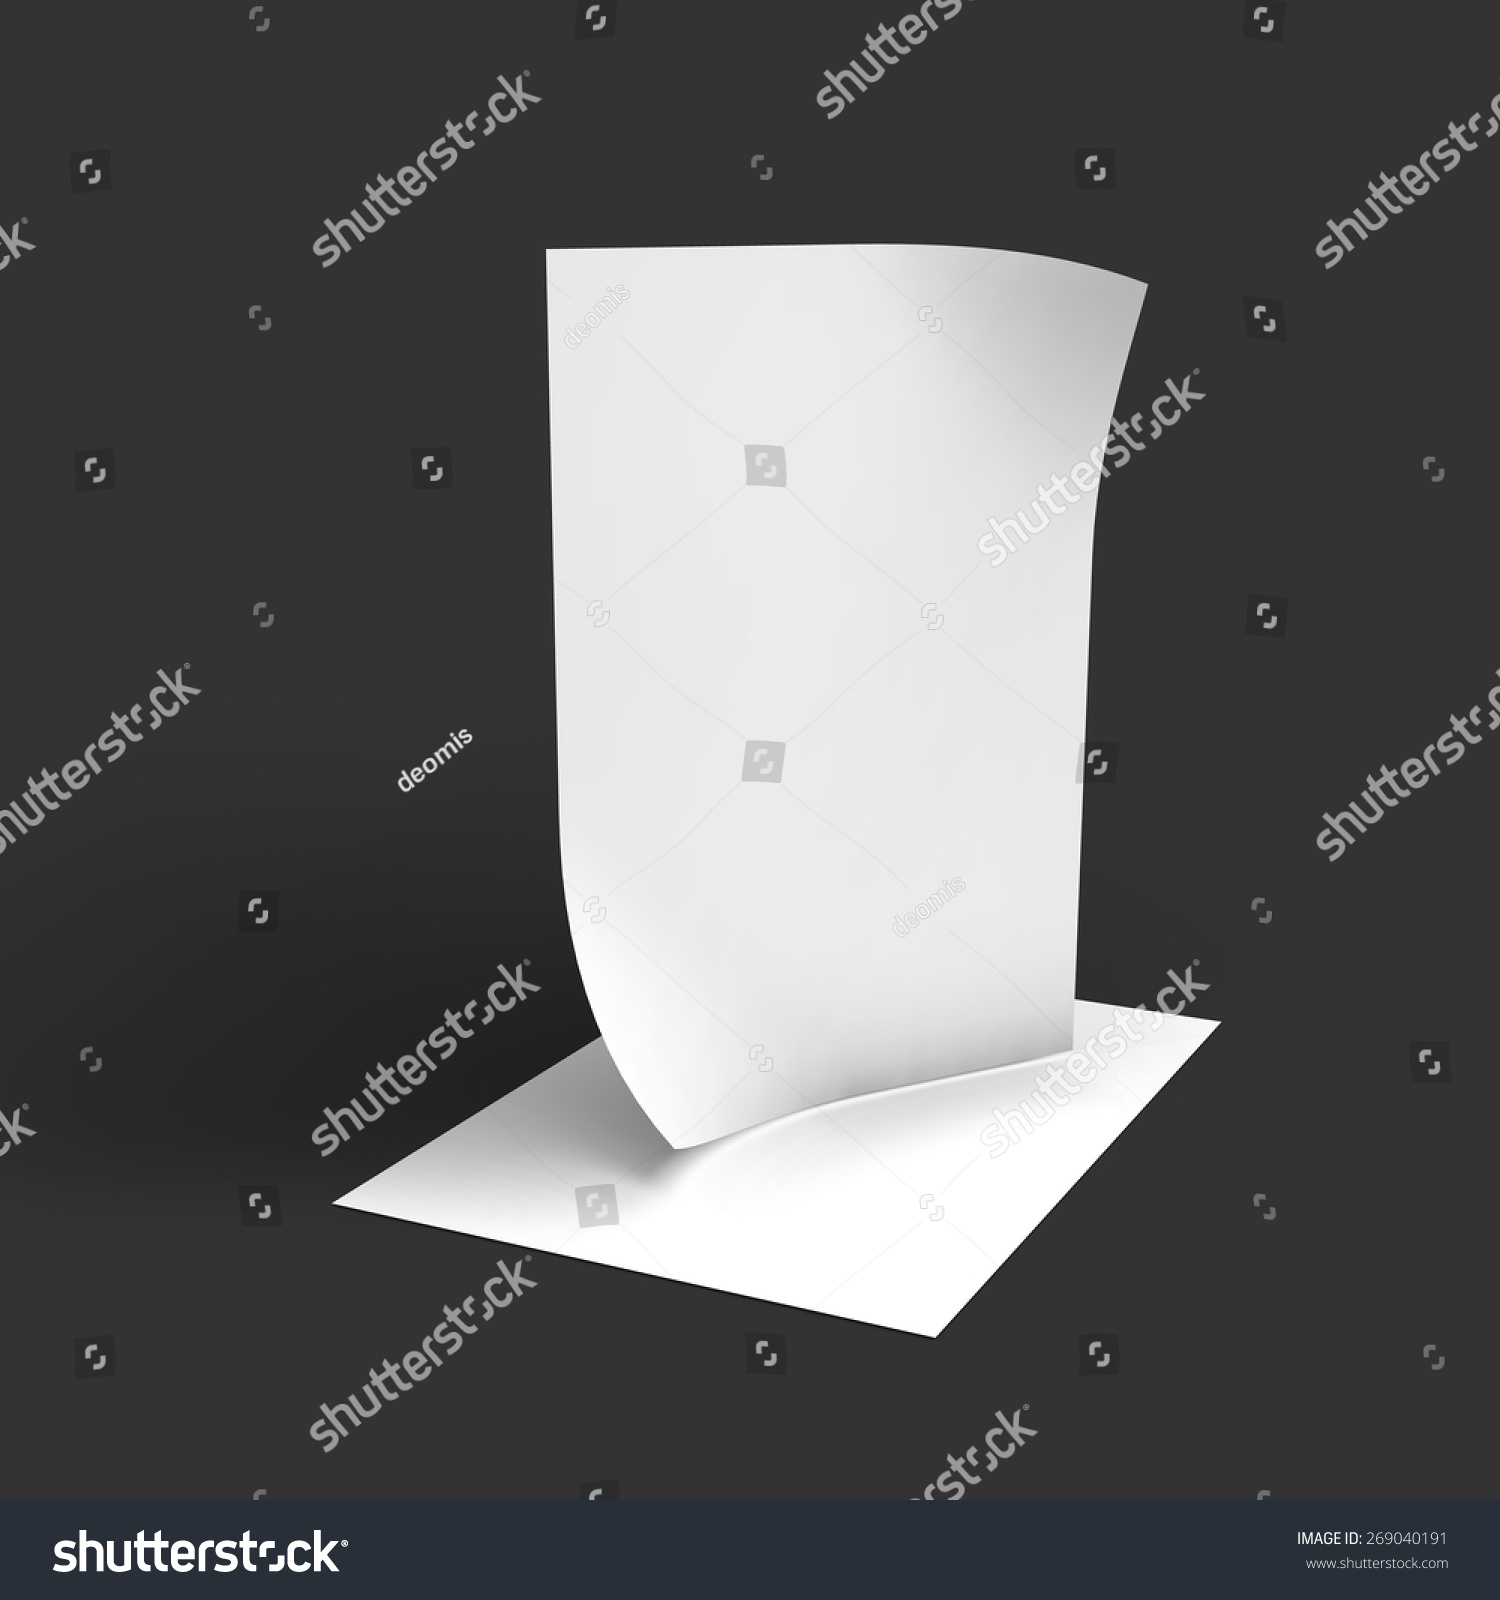 Stack Pages Curved Corners Business Mockup Stock Vector 269040191 ...